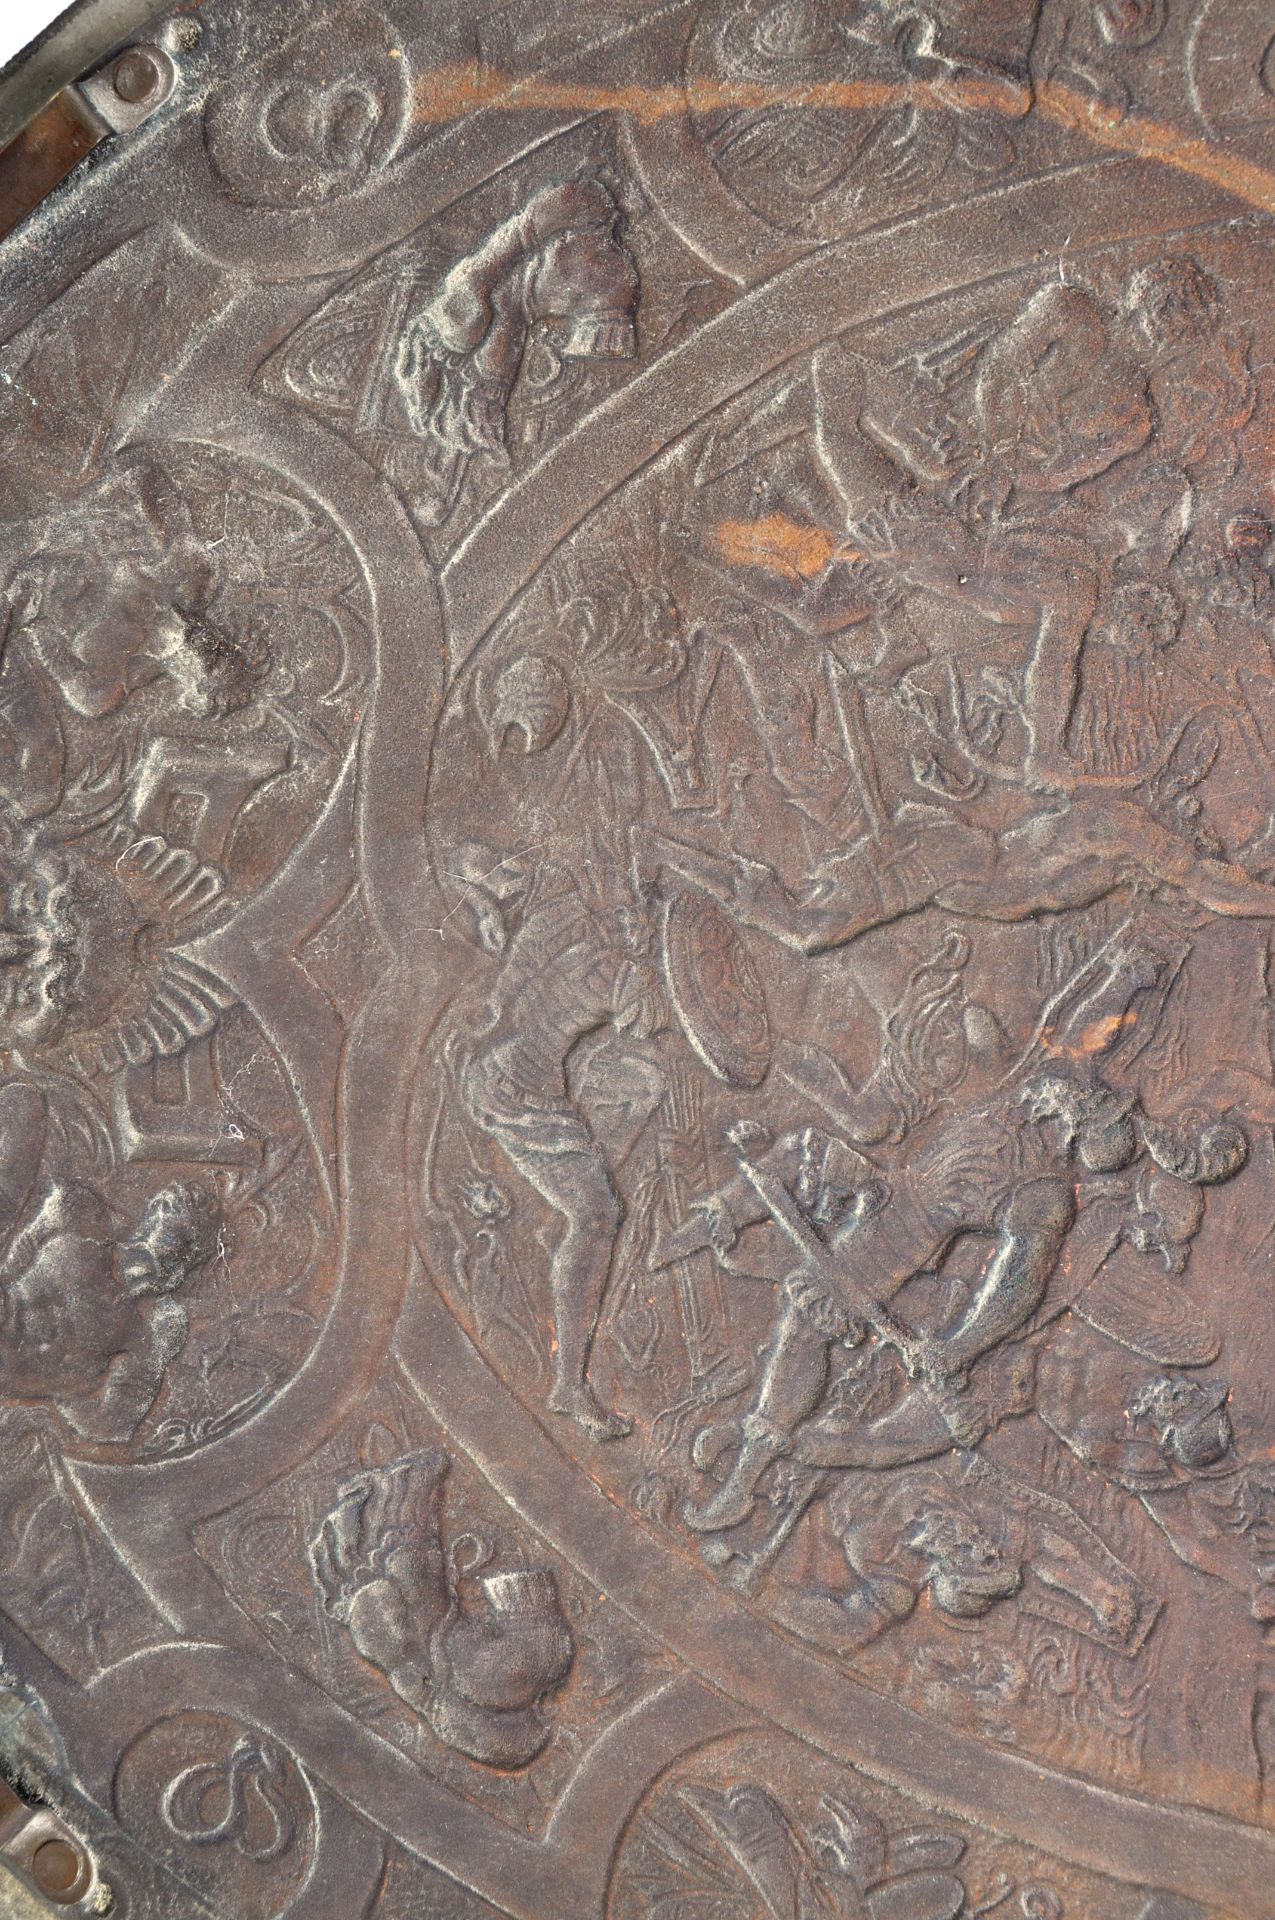 19TH CENTURY DECORATIVE COPPER SHIELD RELATING TO HENRY II - Image 8 of 8